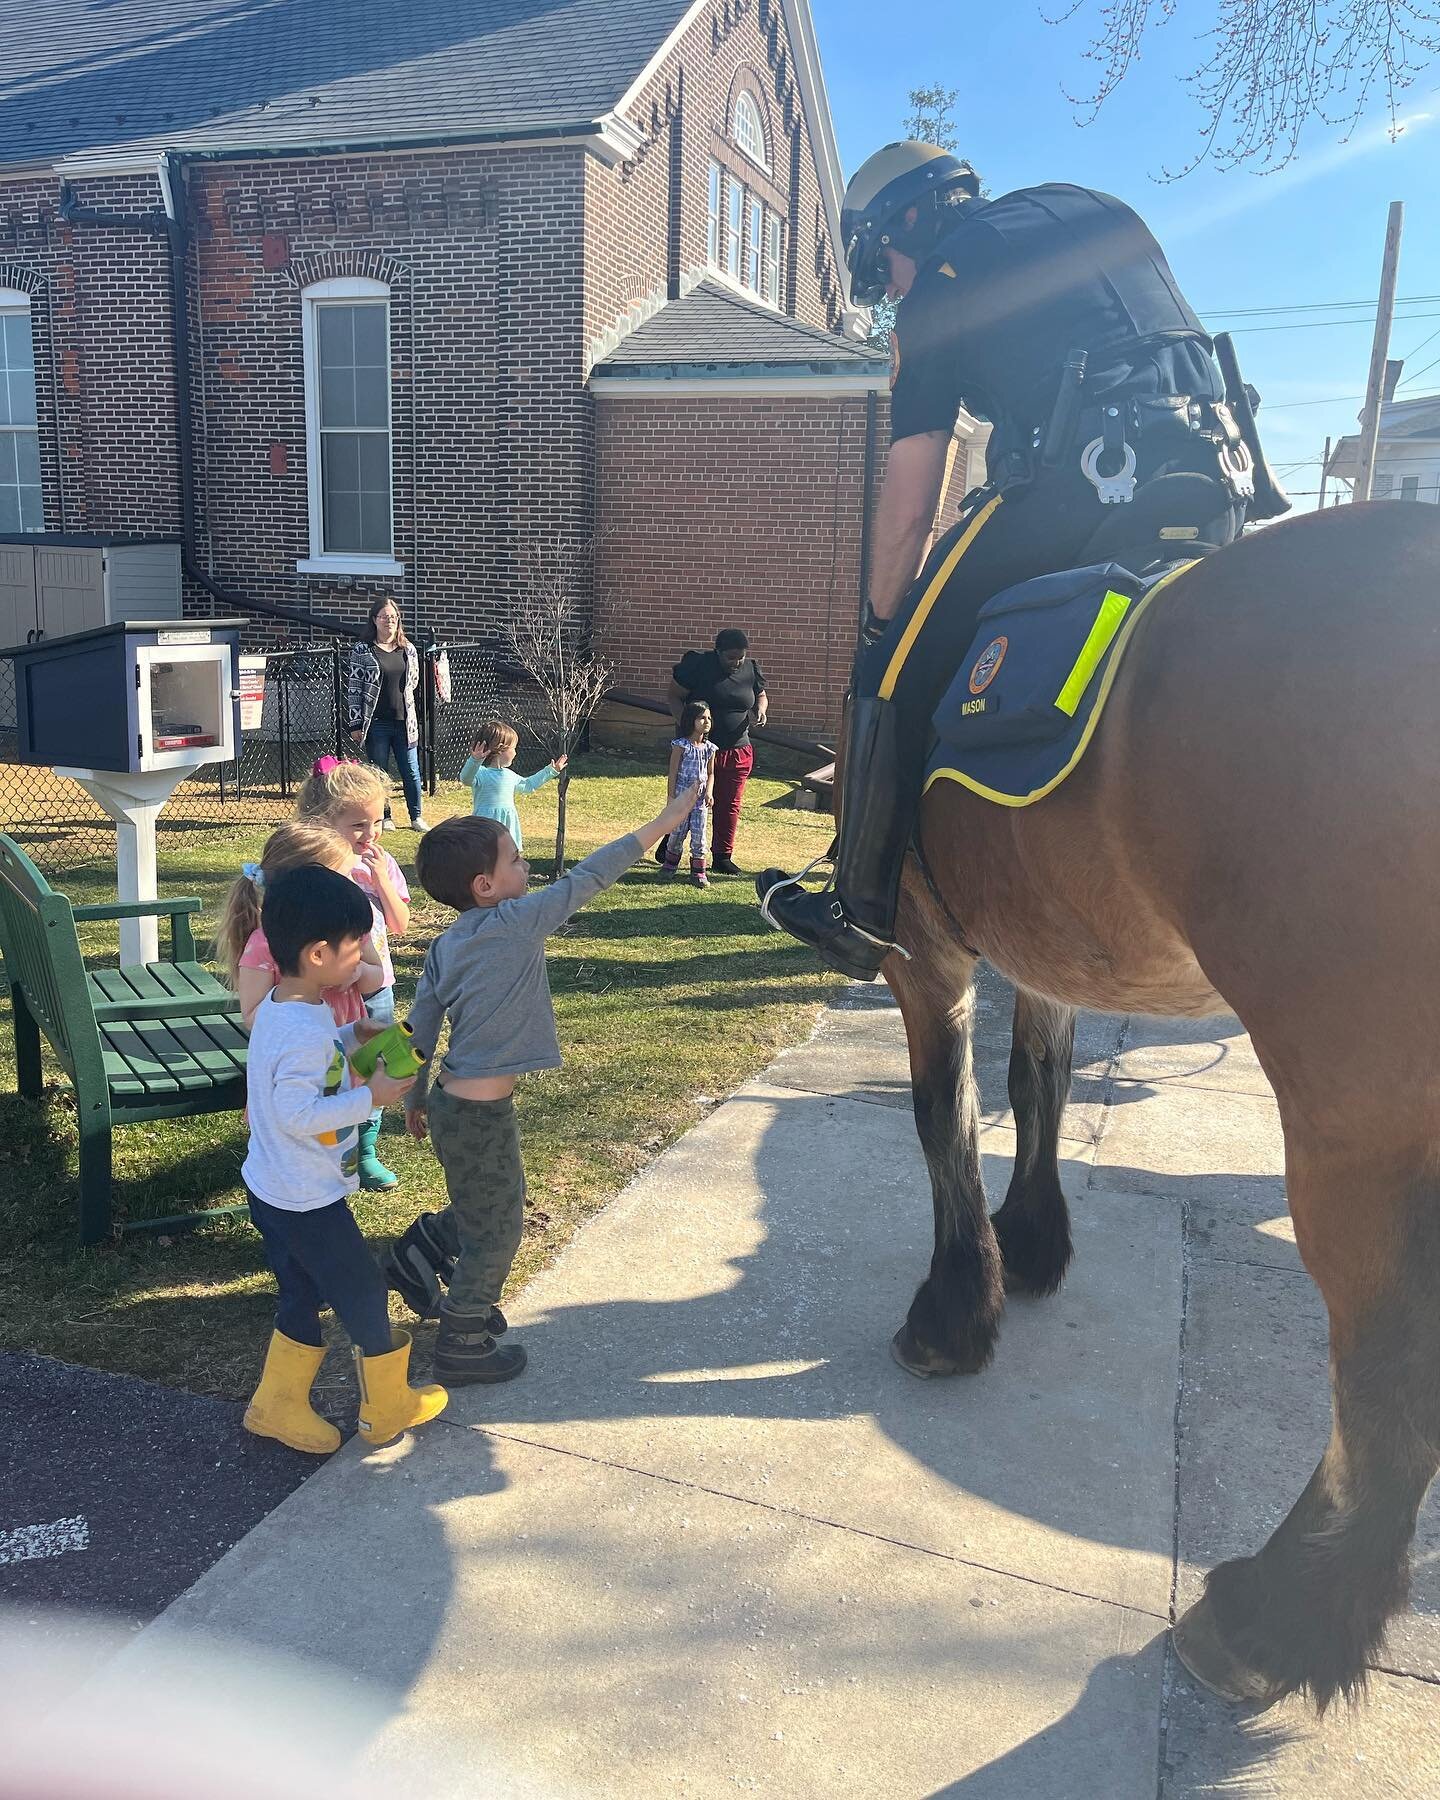 Look who stopped by for a visit!  #bethlehempolice #bethlehempolicemountedunit